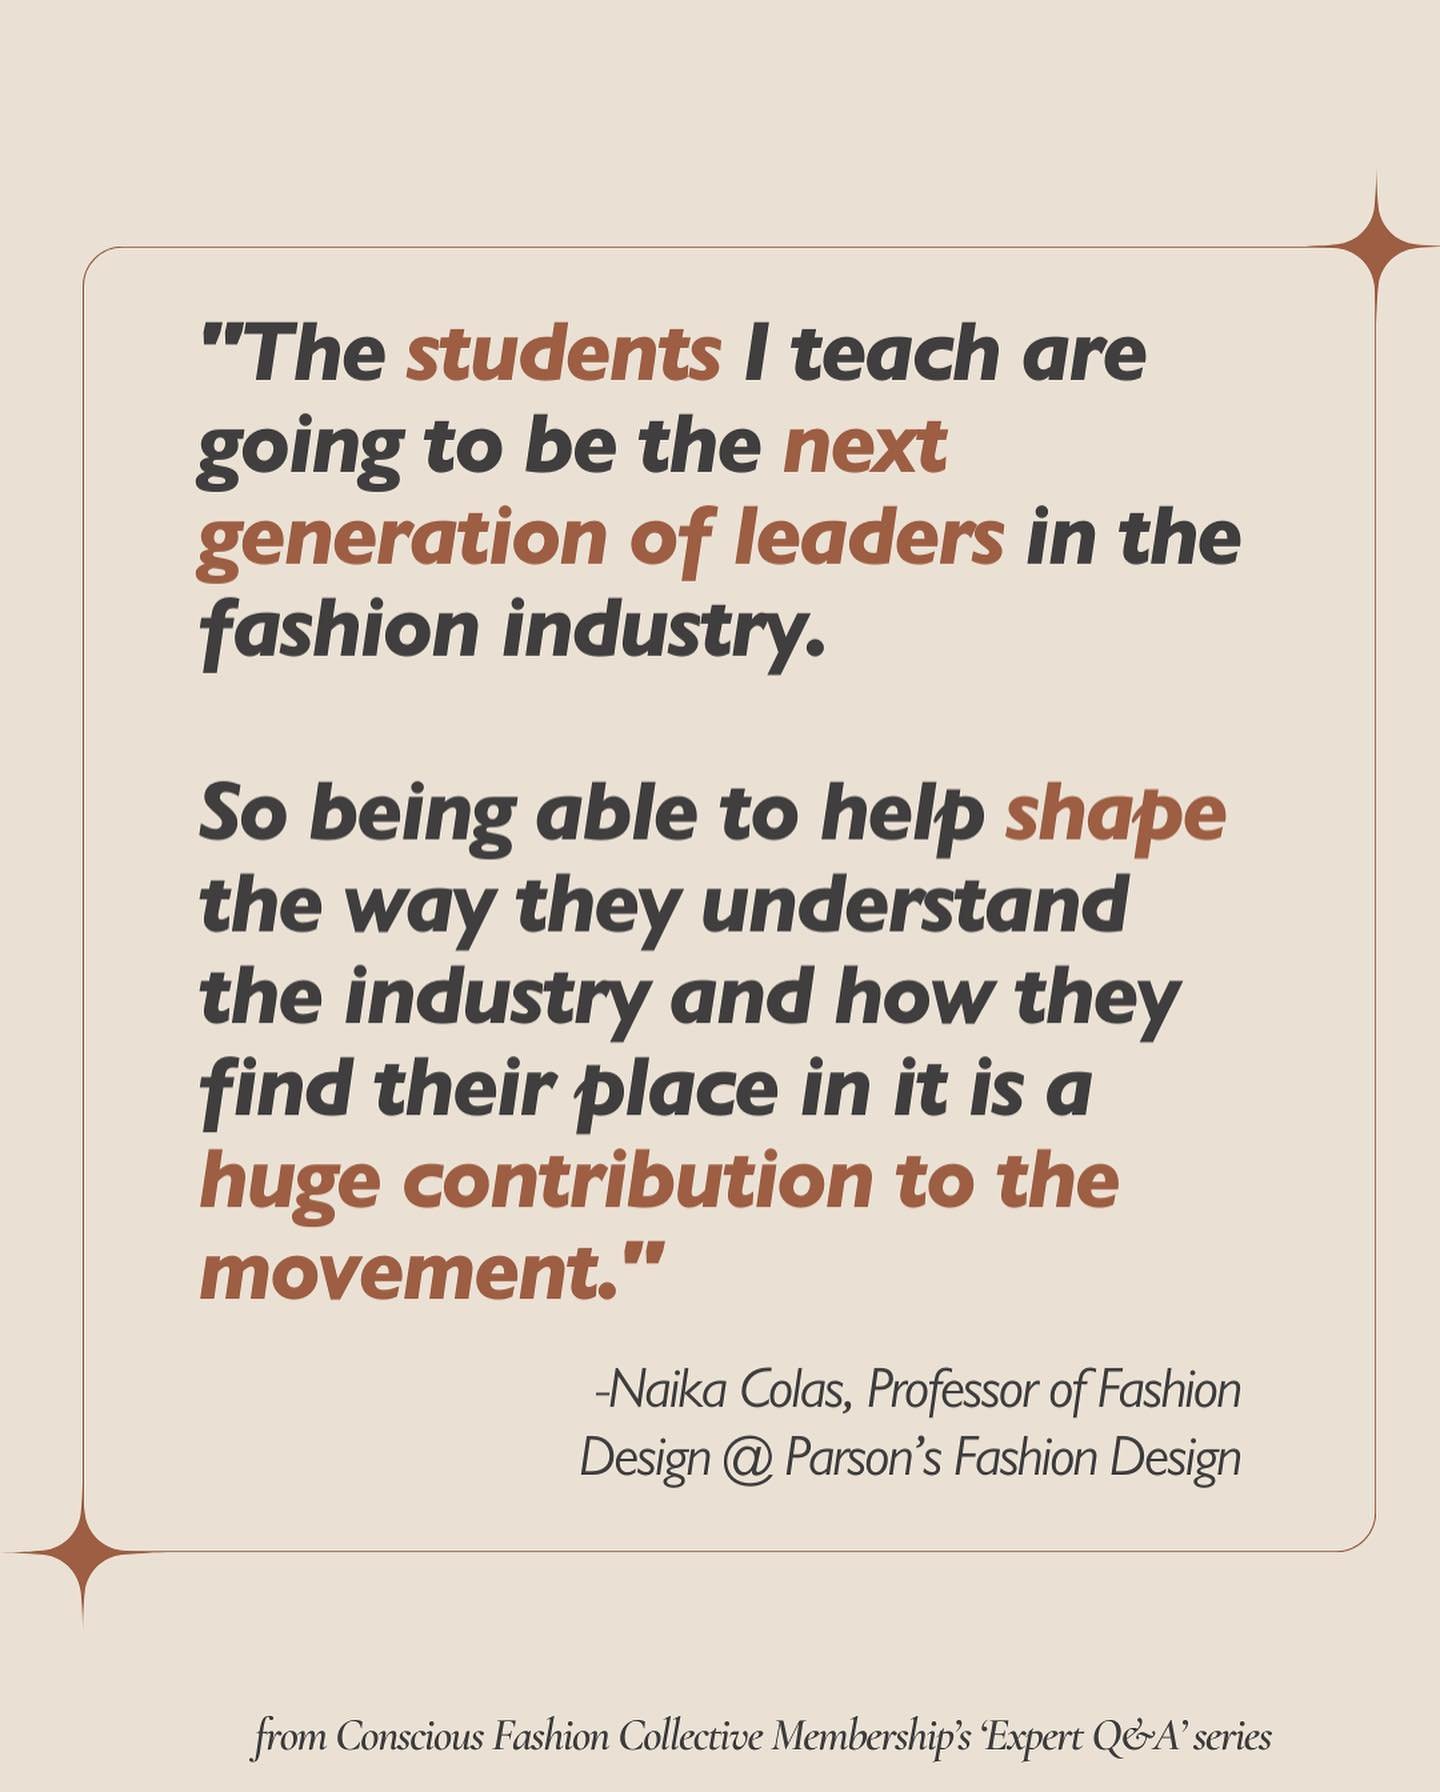 💬 How does academia actively contribute to growing the sustainable fashion movement? ⁠
⁠
What kinds of jobs are available to people who want to work in academia with a focus on sustainable fashion? ⁠
⁠
What kinds of skills and knowledge are hiring m